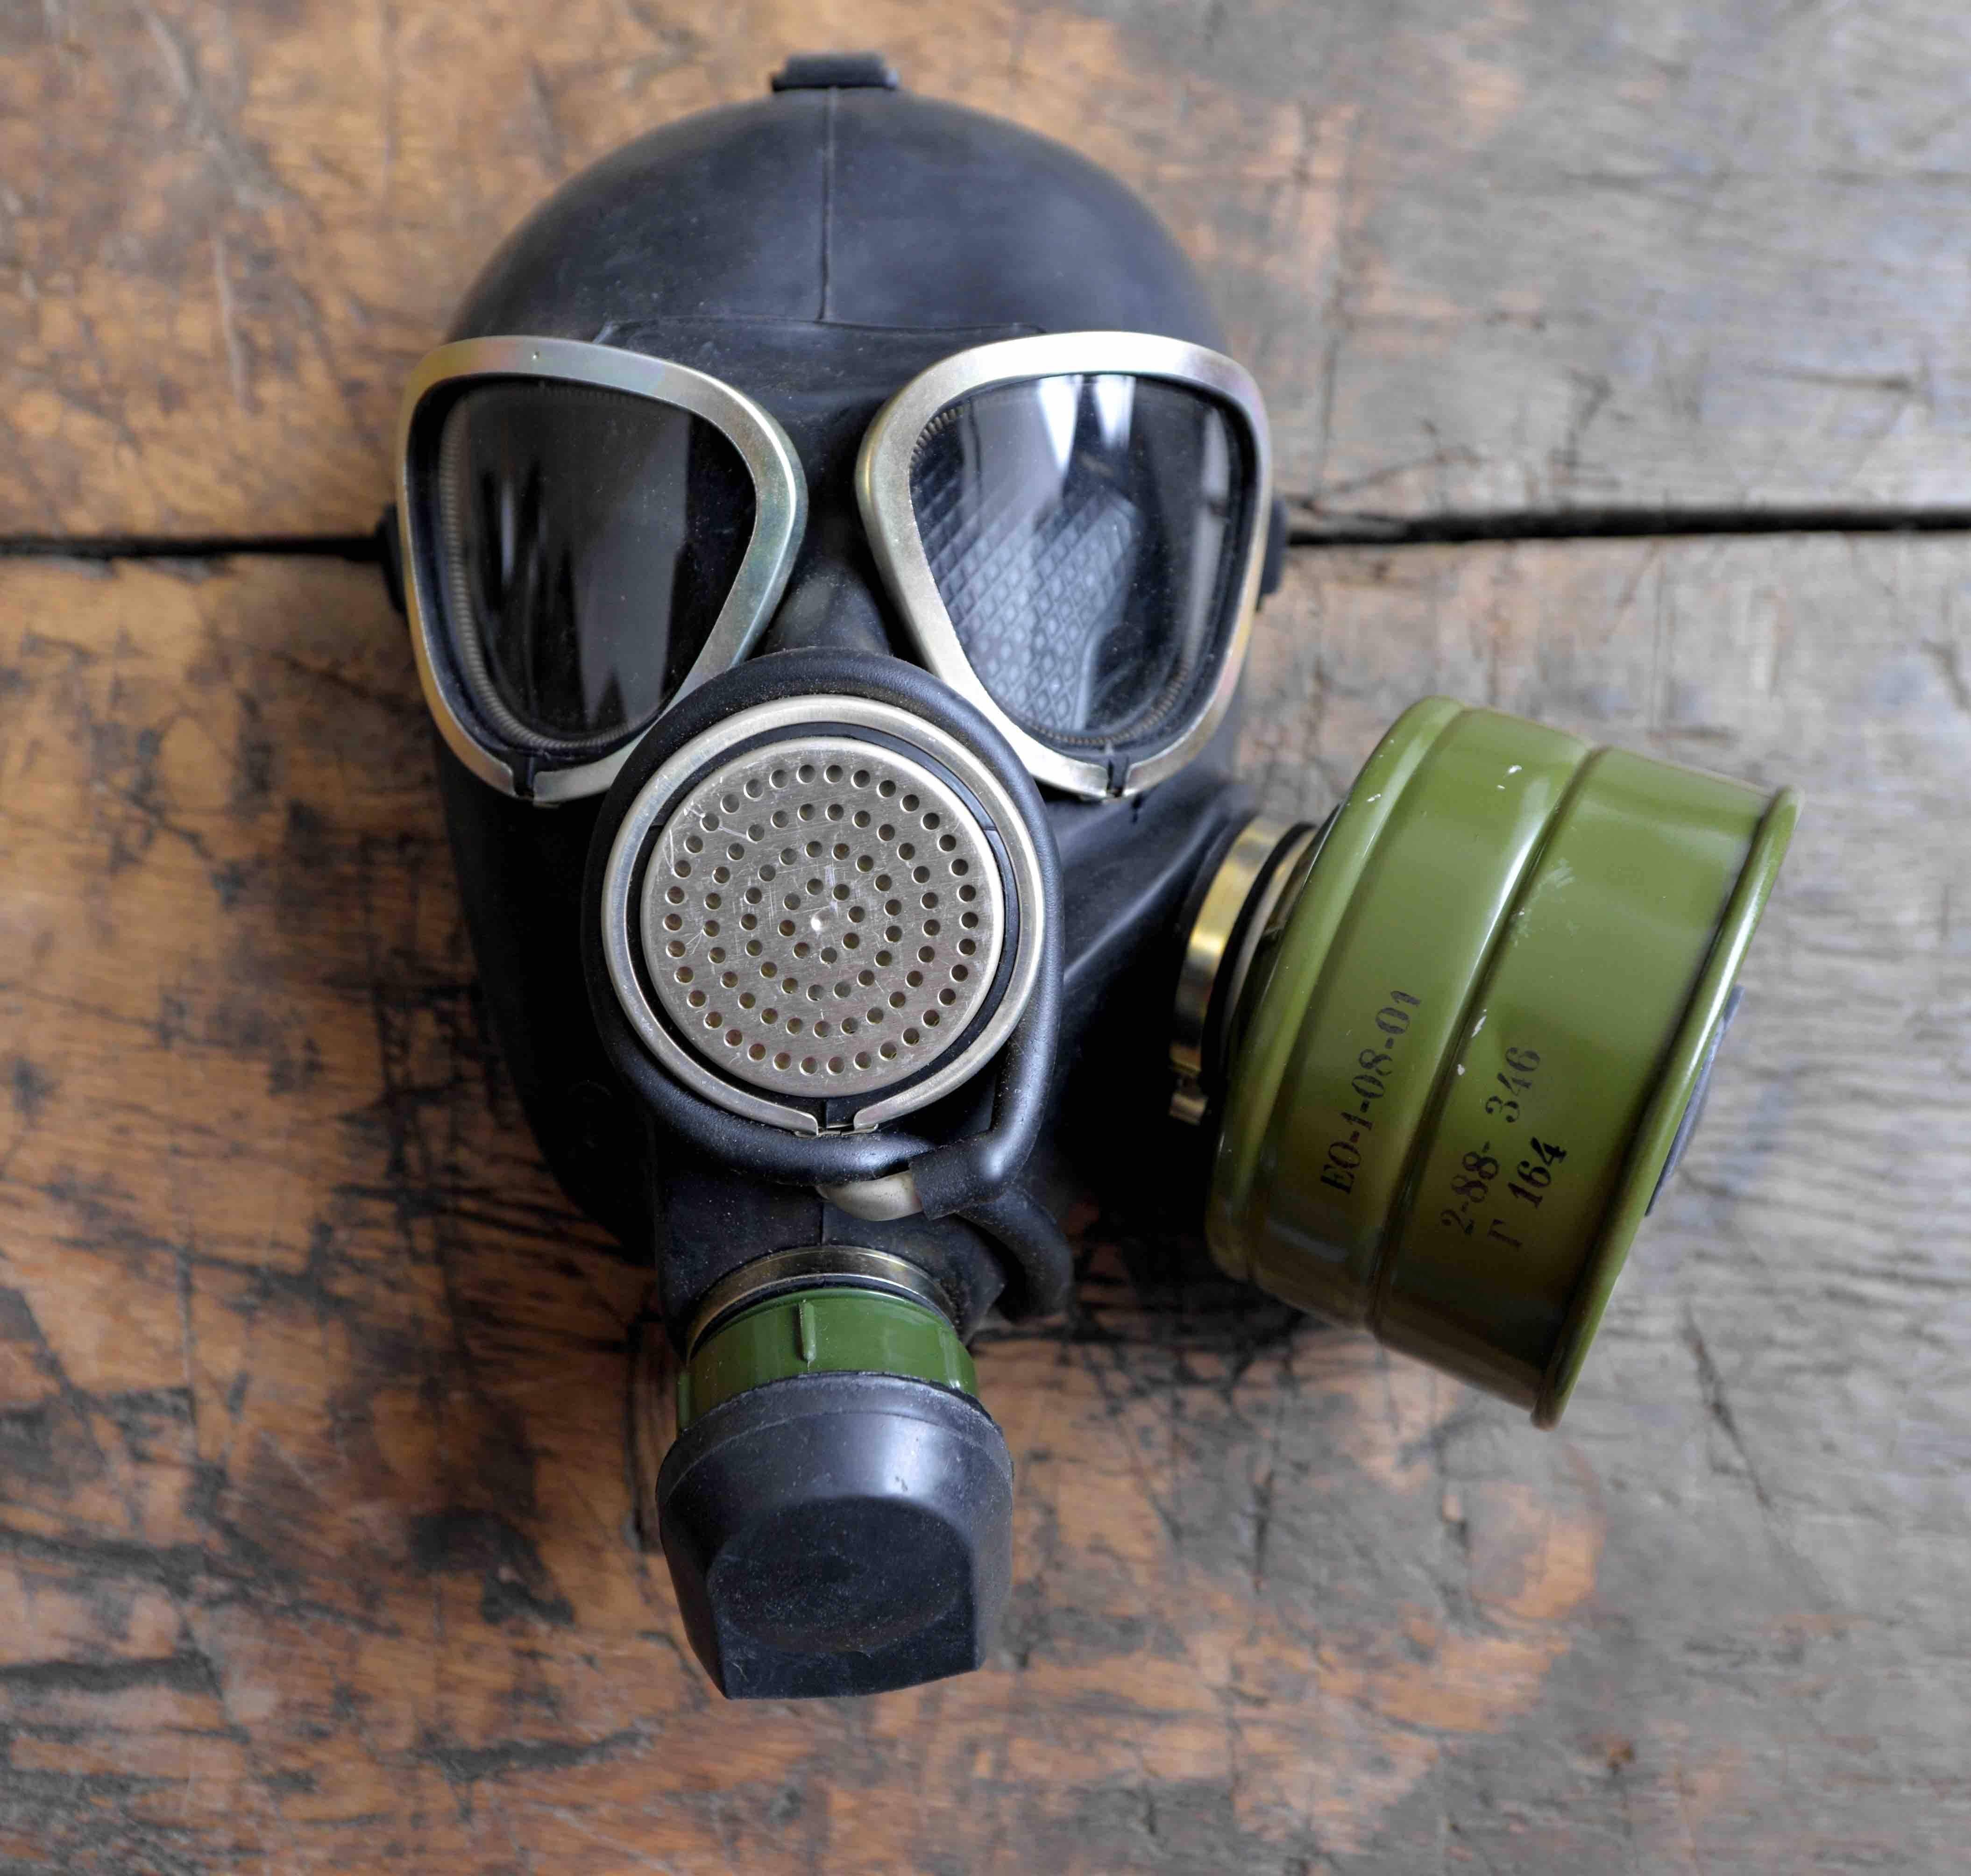 1970s gas mask